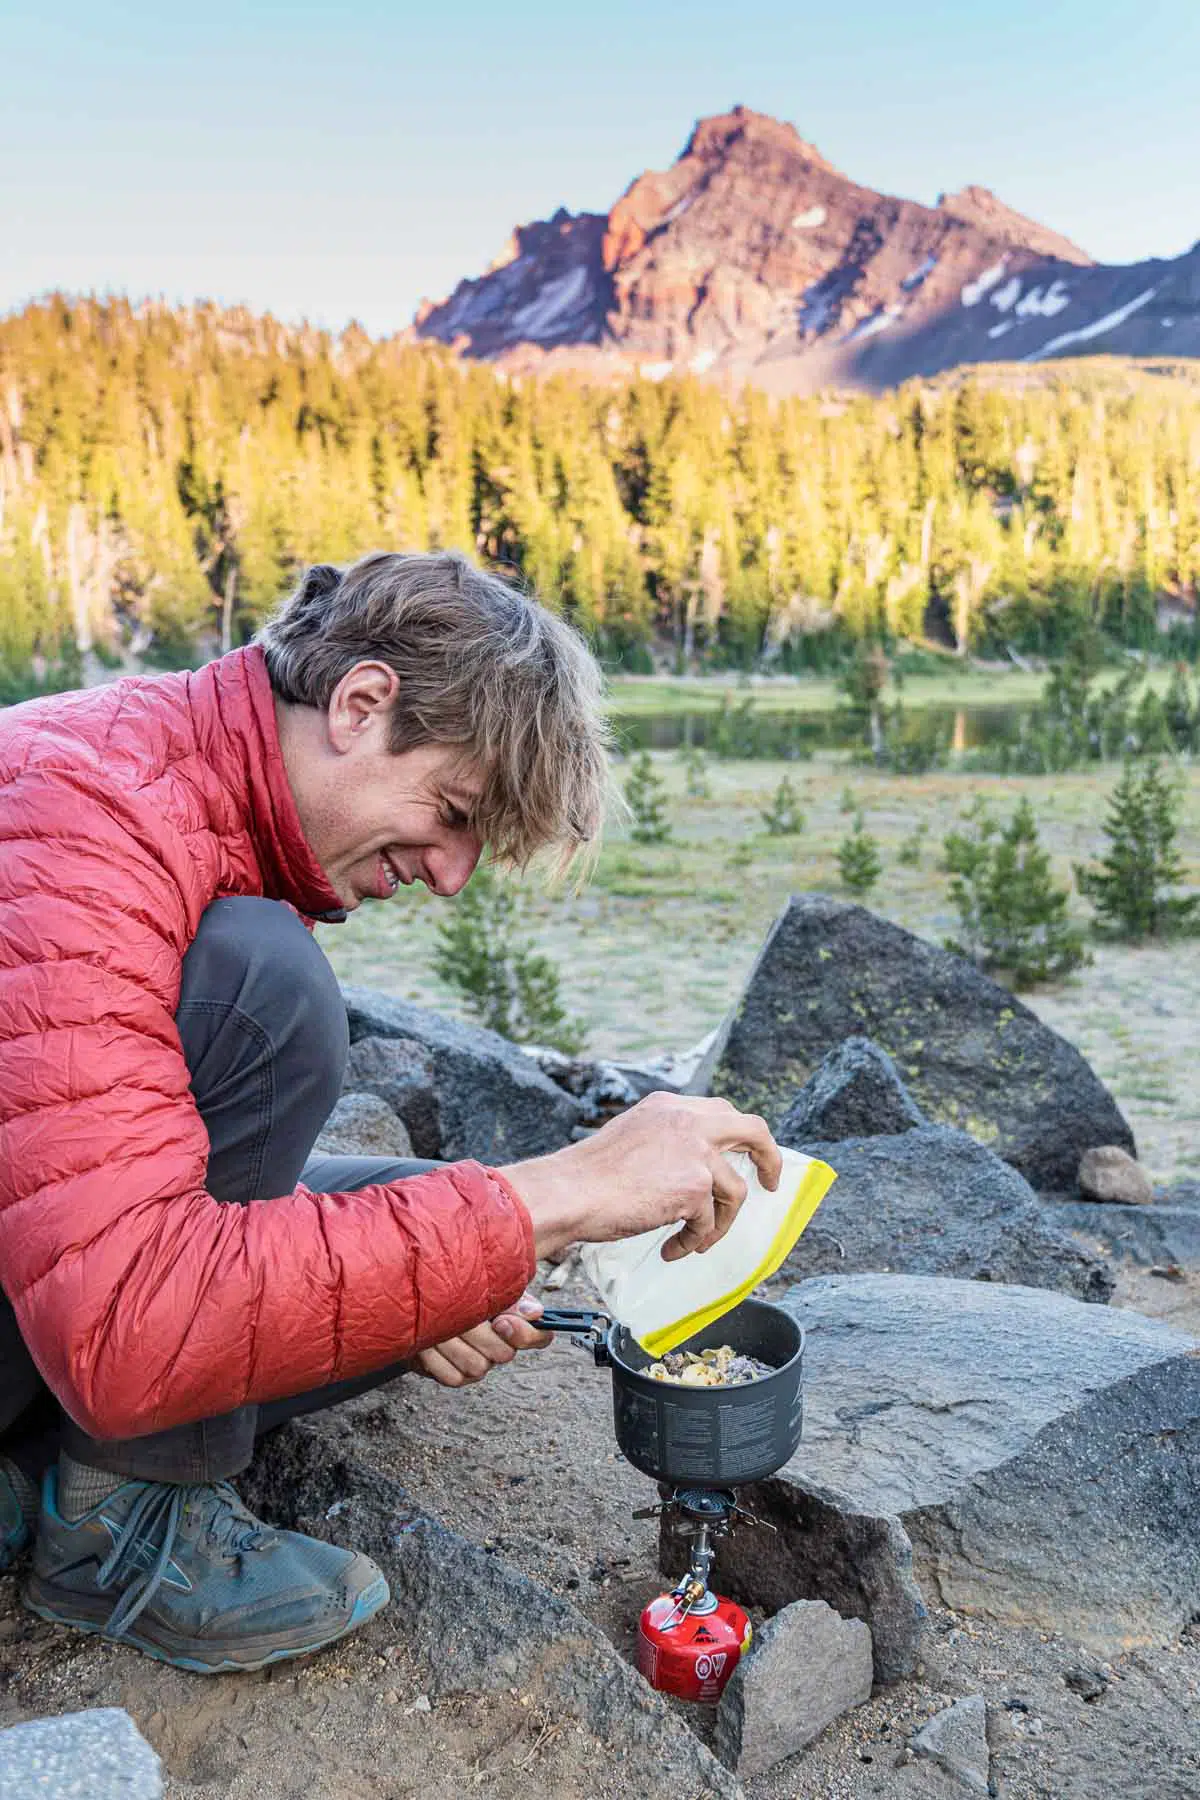 Michael andding food to a backpacking pot. There is a forest and mountain peak in the distance.